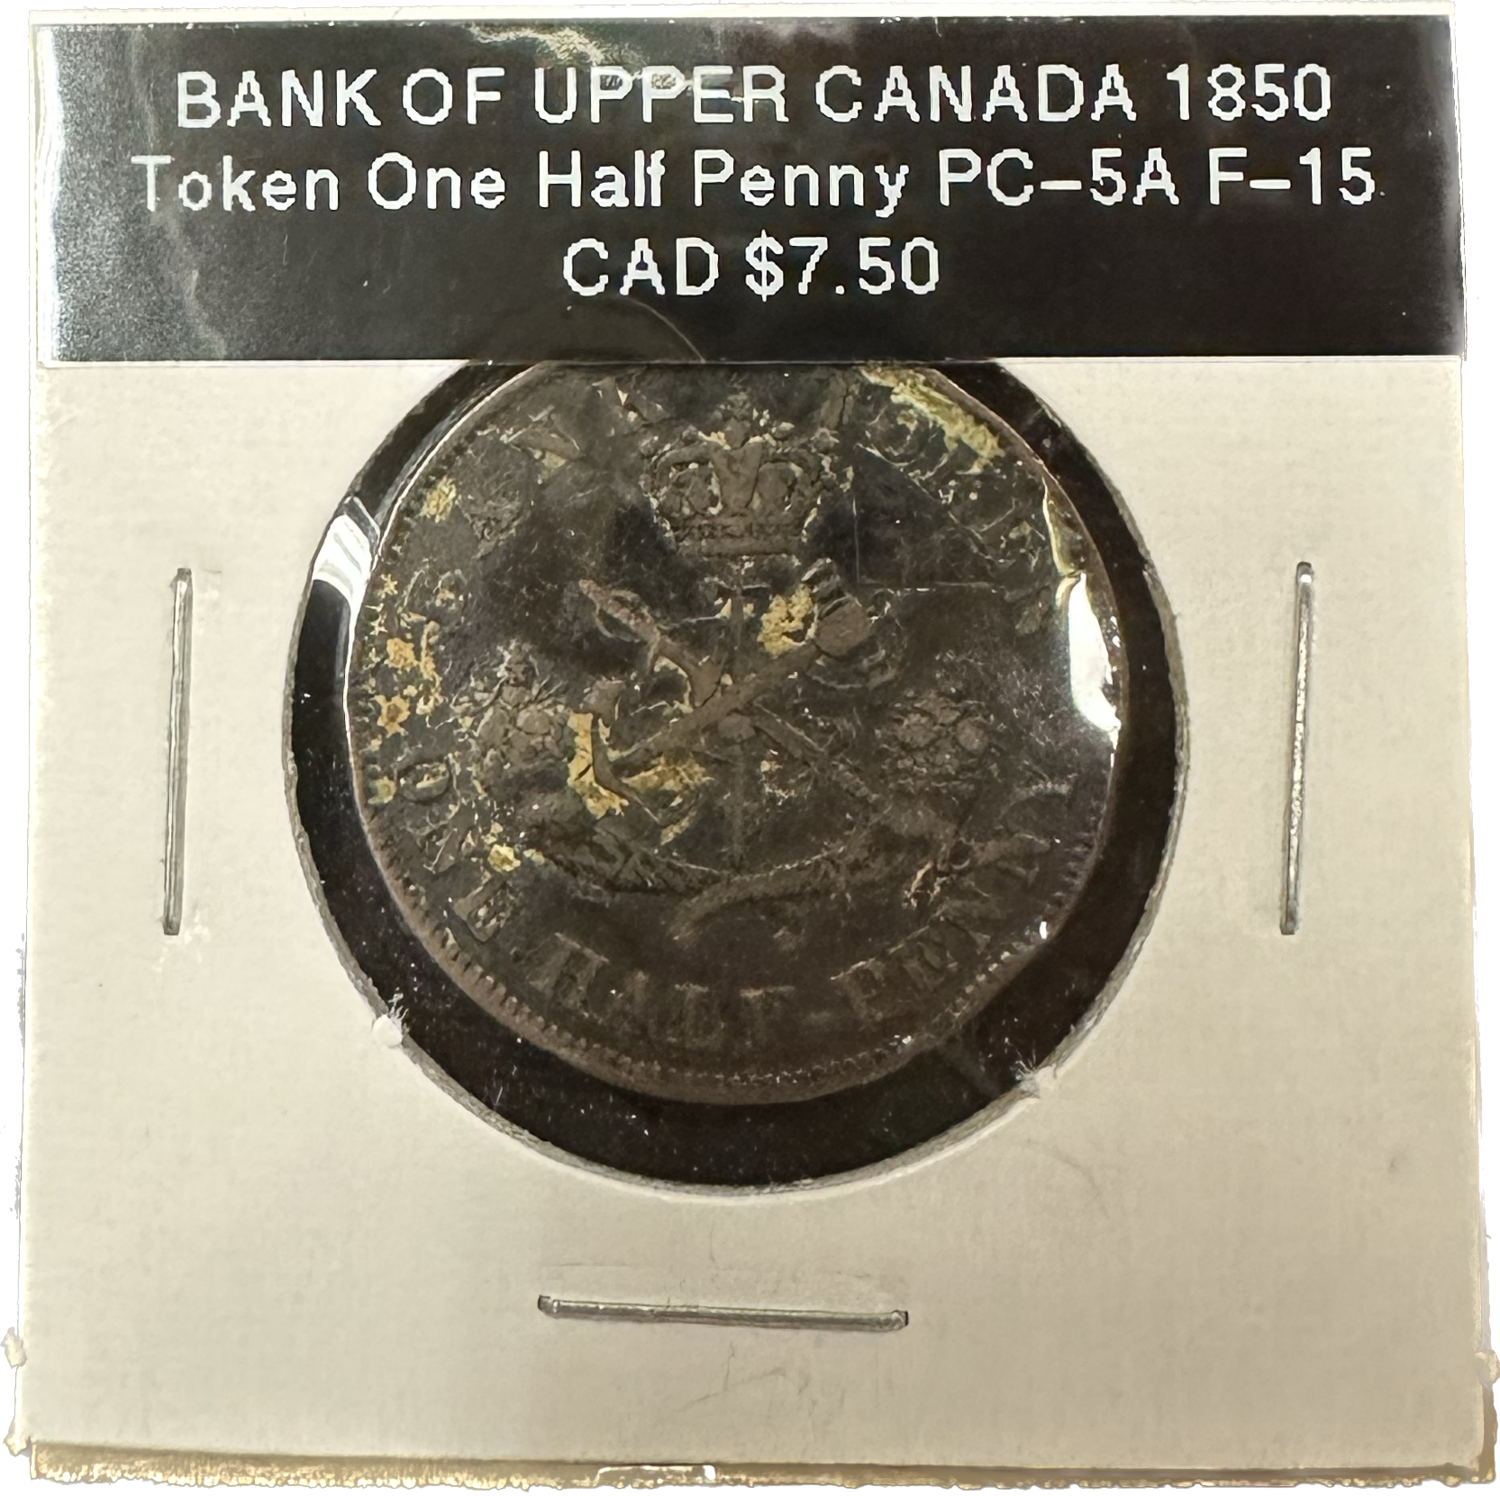 Bank of Upper Canada One Half Penny 1850 PC-5A F-15 Token